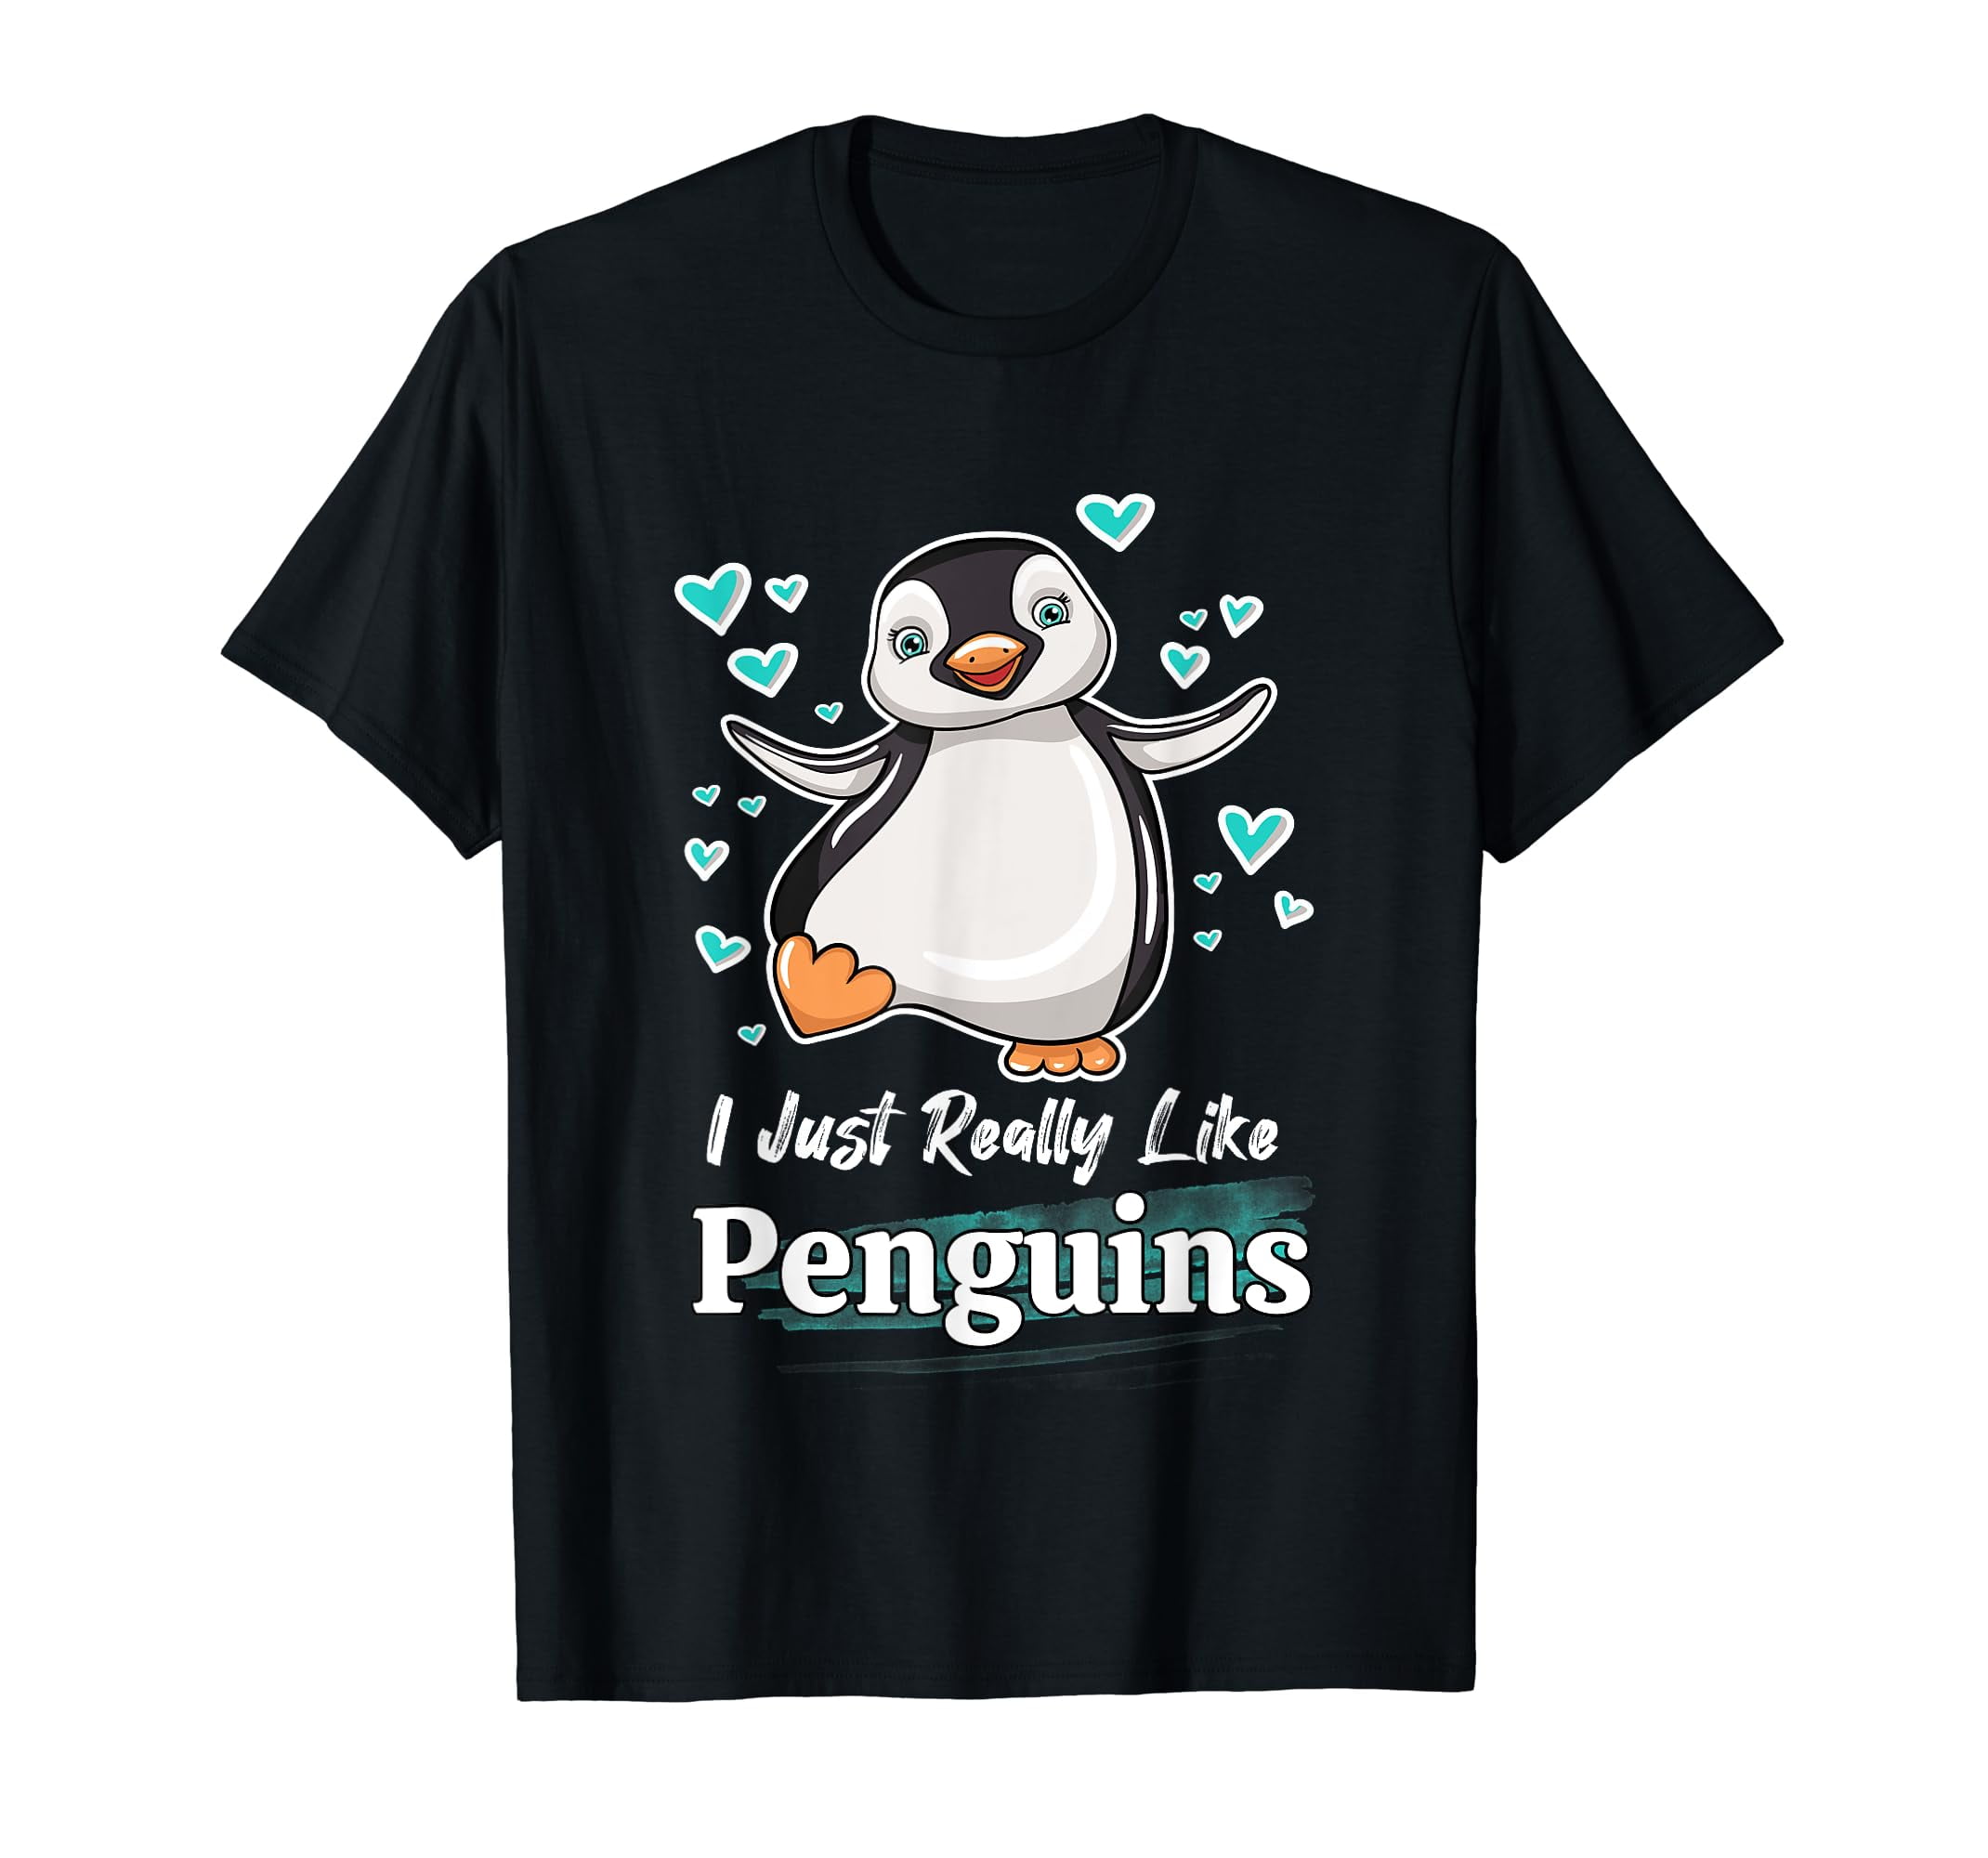 I Just Really Like Penguins Funny Penguin Lover Quote T-Shirt - Walmart.com